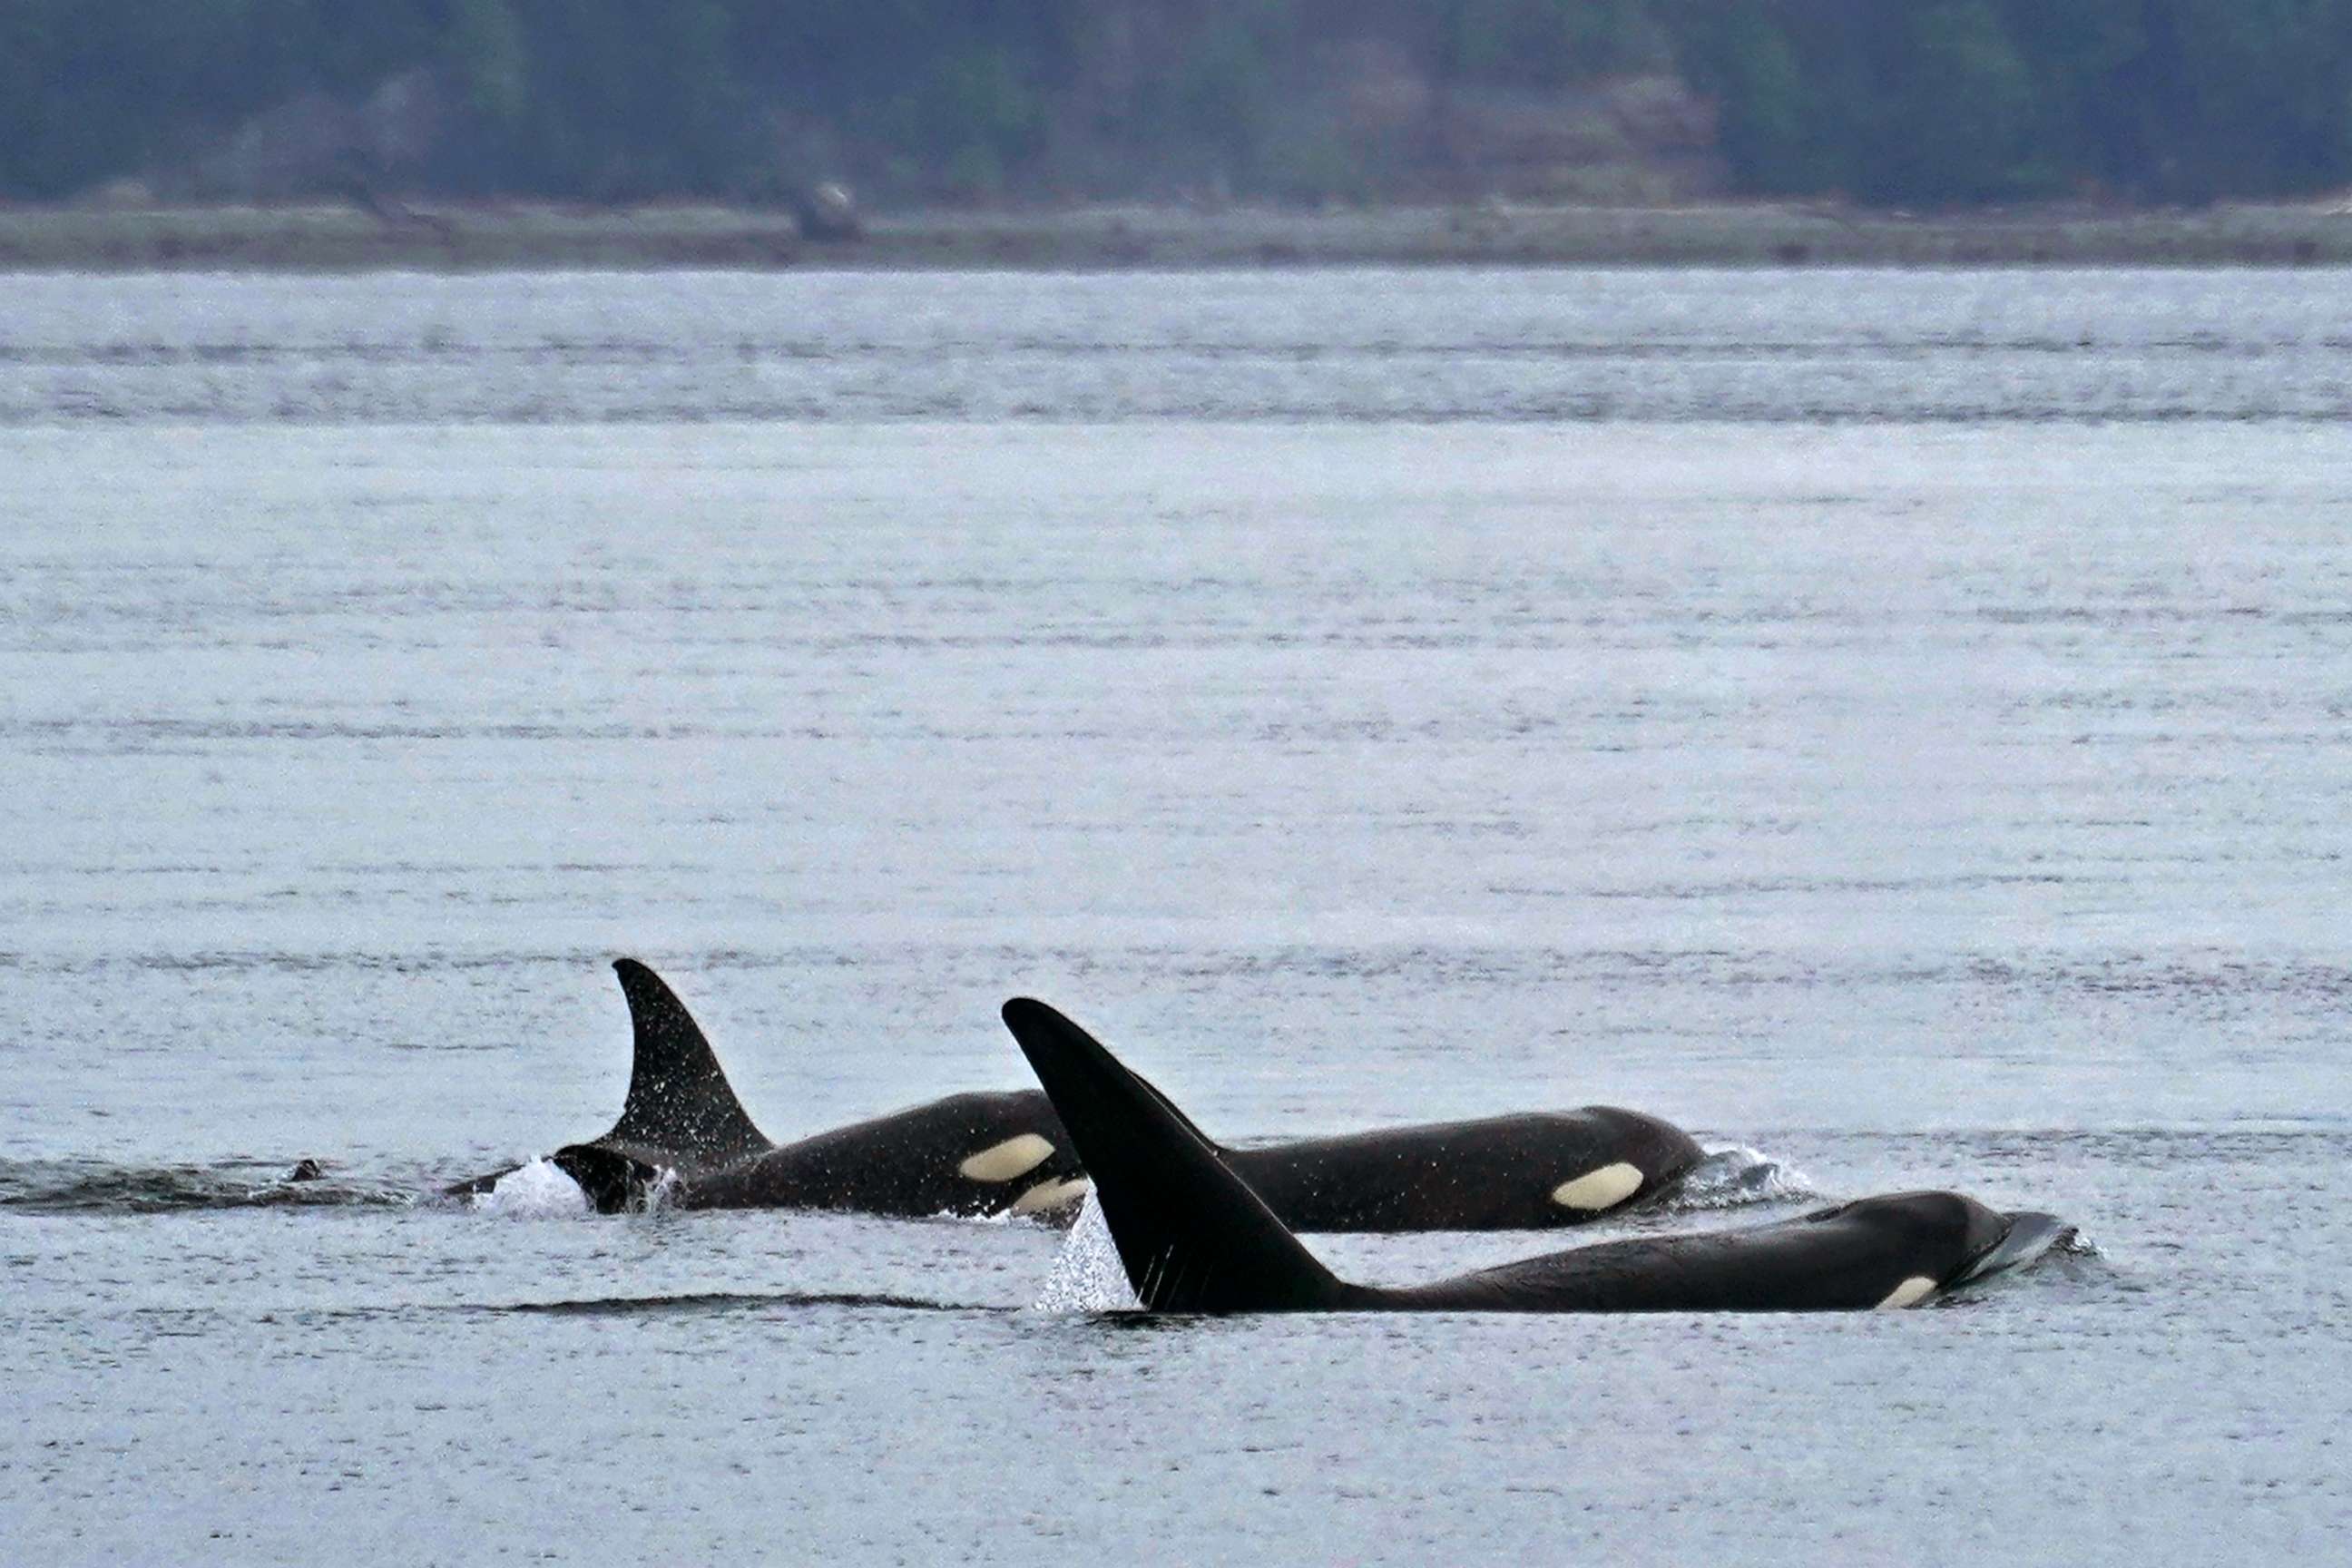 PHOTO: A group of Bigg's killer whales swim together as seen from a Pacific Whale Watch Association vessel on May 4, 2022, near Whidbey Island in Washington state.